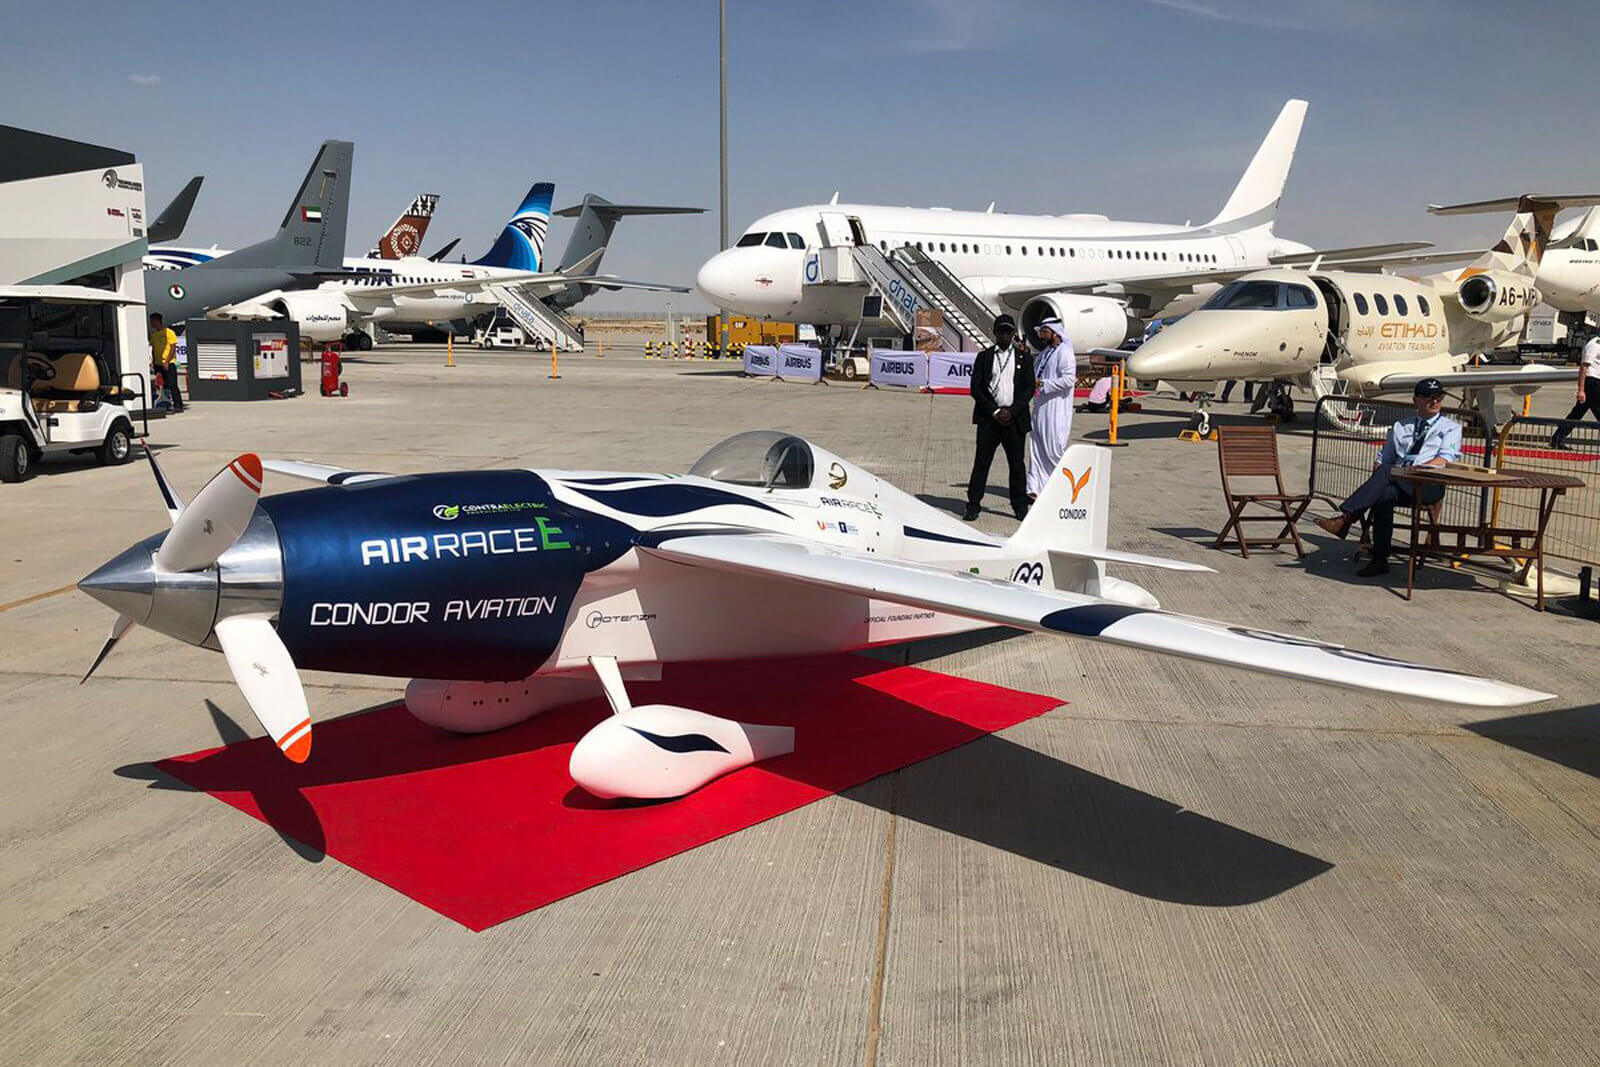 Airbus introduced the all-electric racing plane